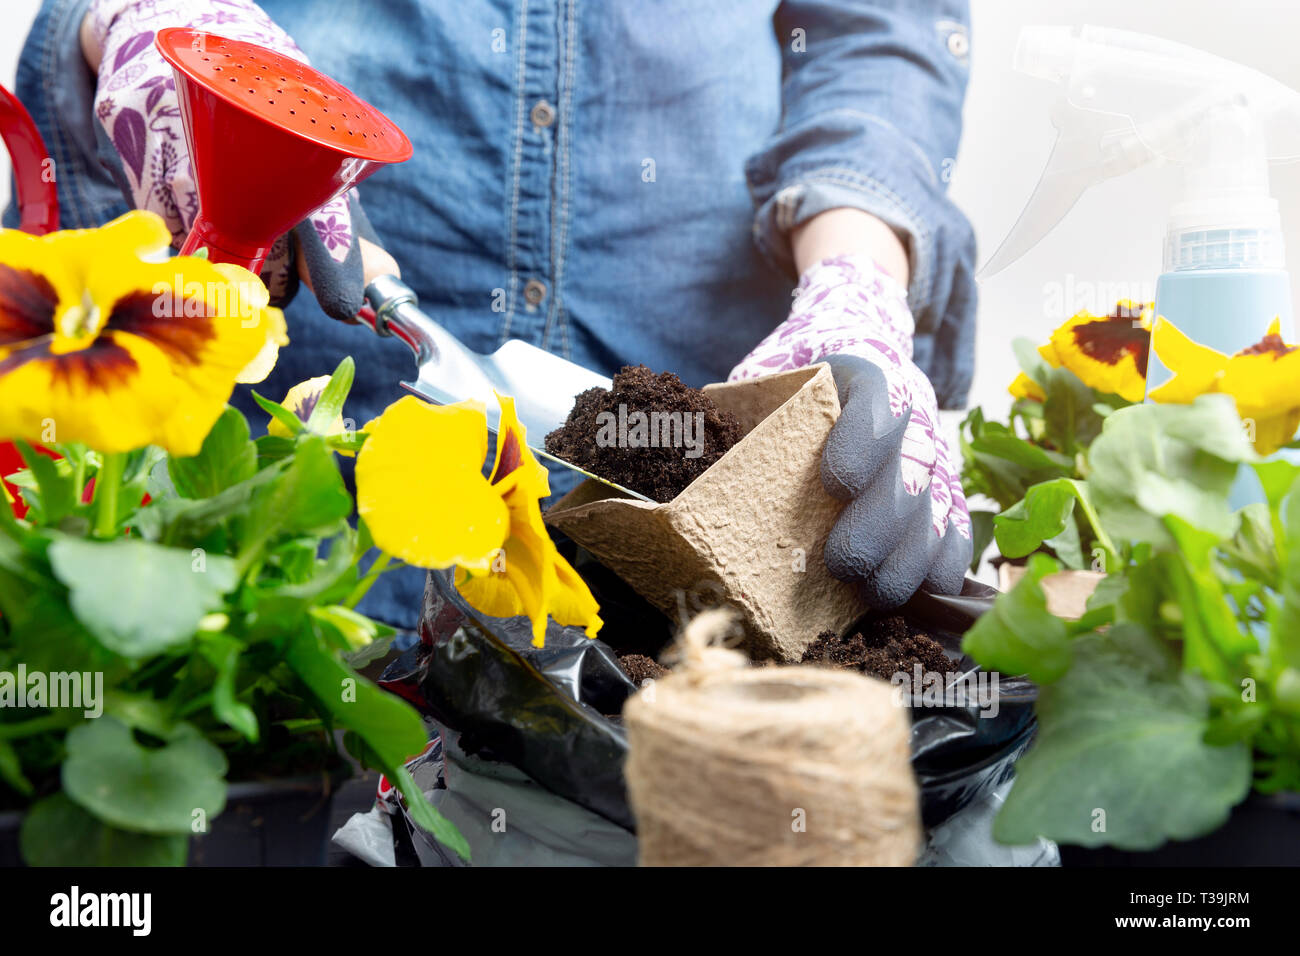 Hands of gardener woman putting soil into a paper flower pot. Planting spring pansy flower. Gardening concept Stock Photo